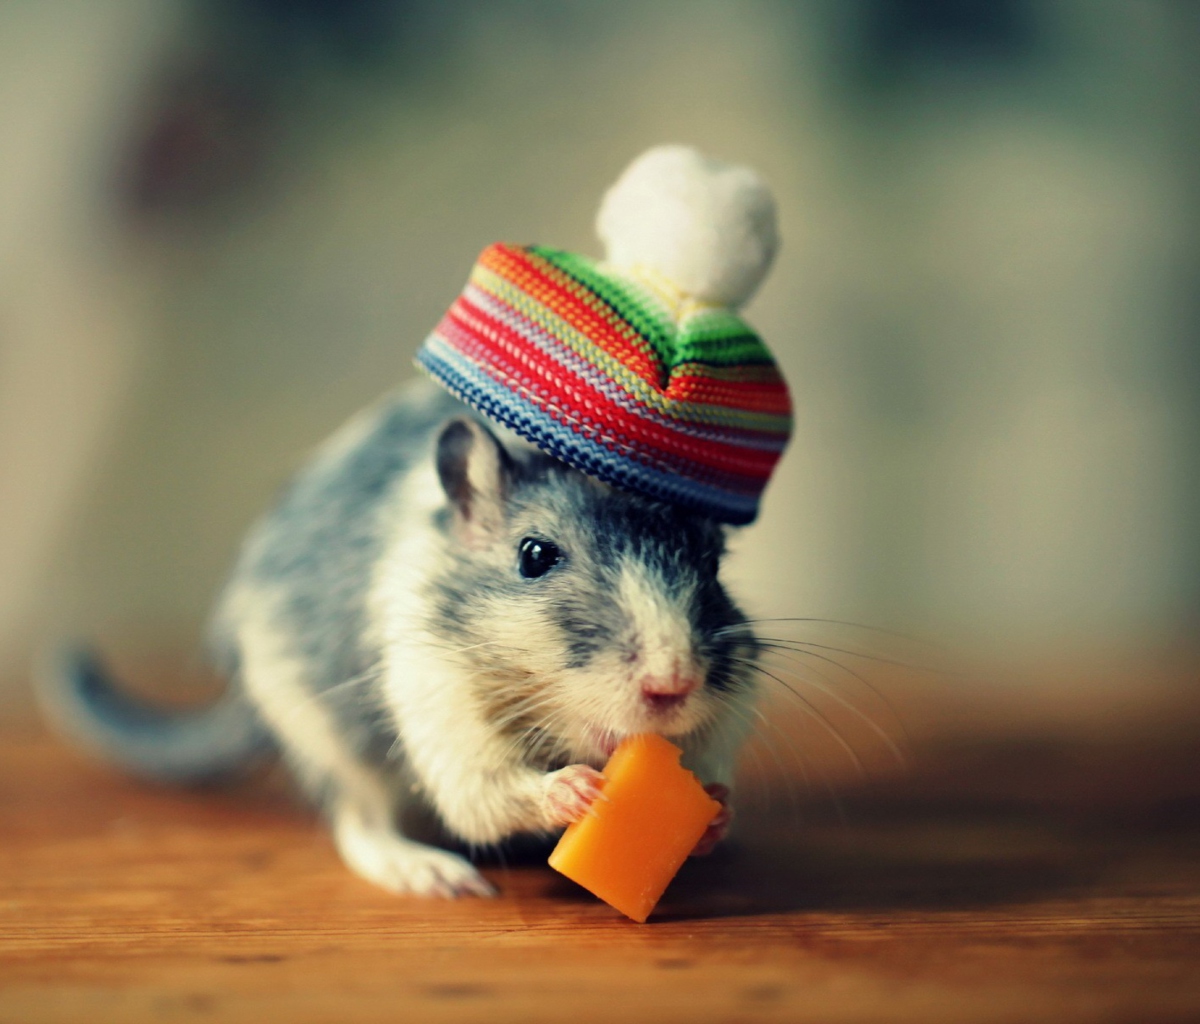 Mouse In Funny Little Hat Eating Cheese wallpaper 1200x1024